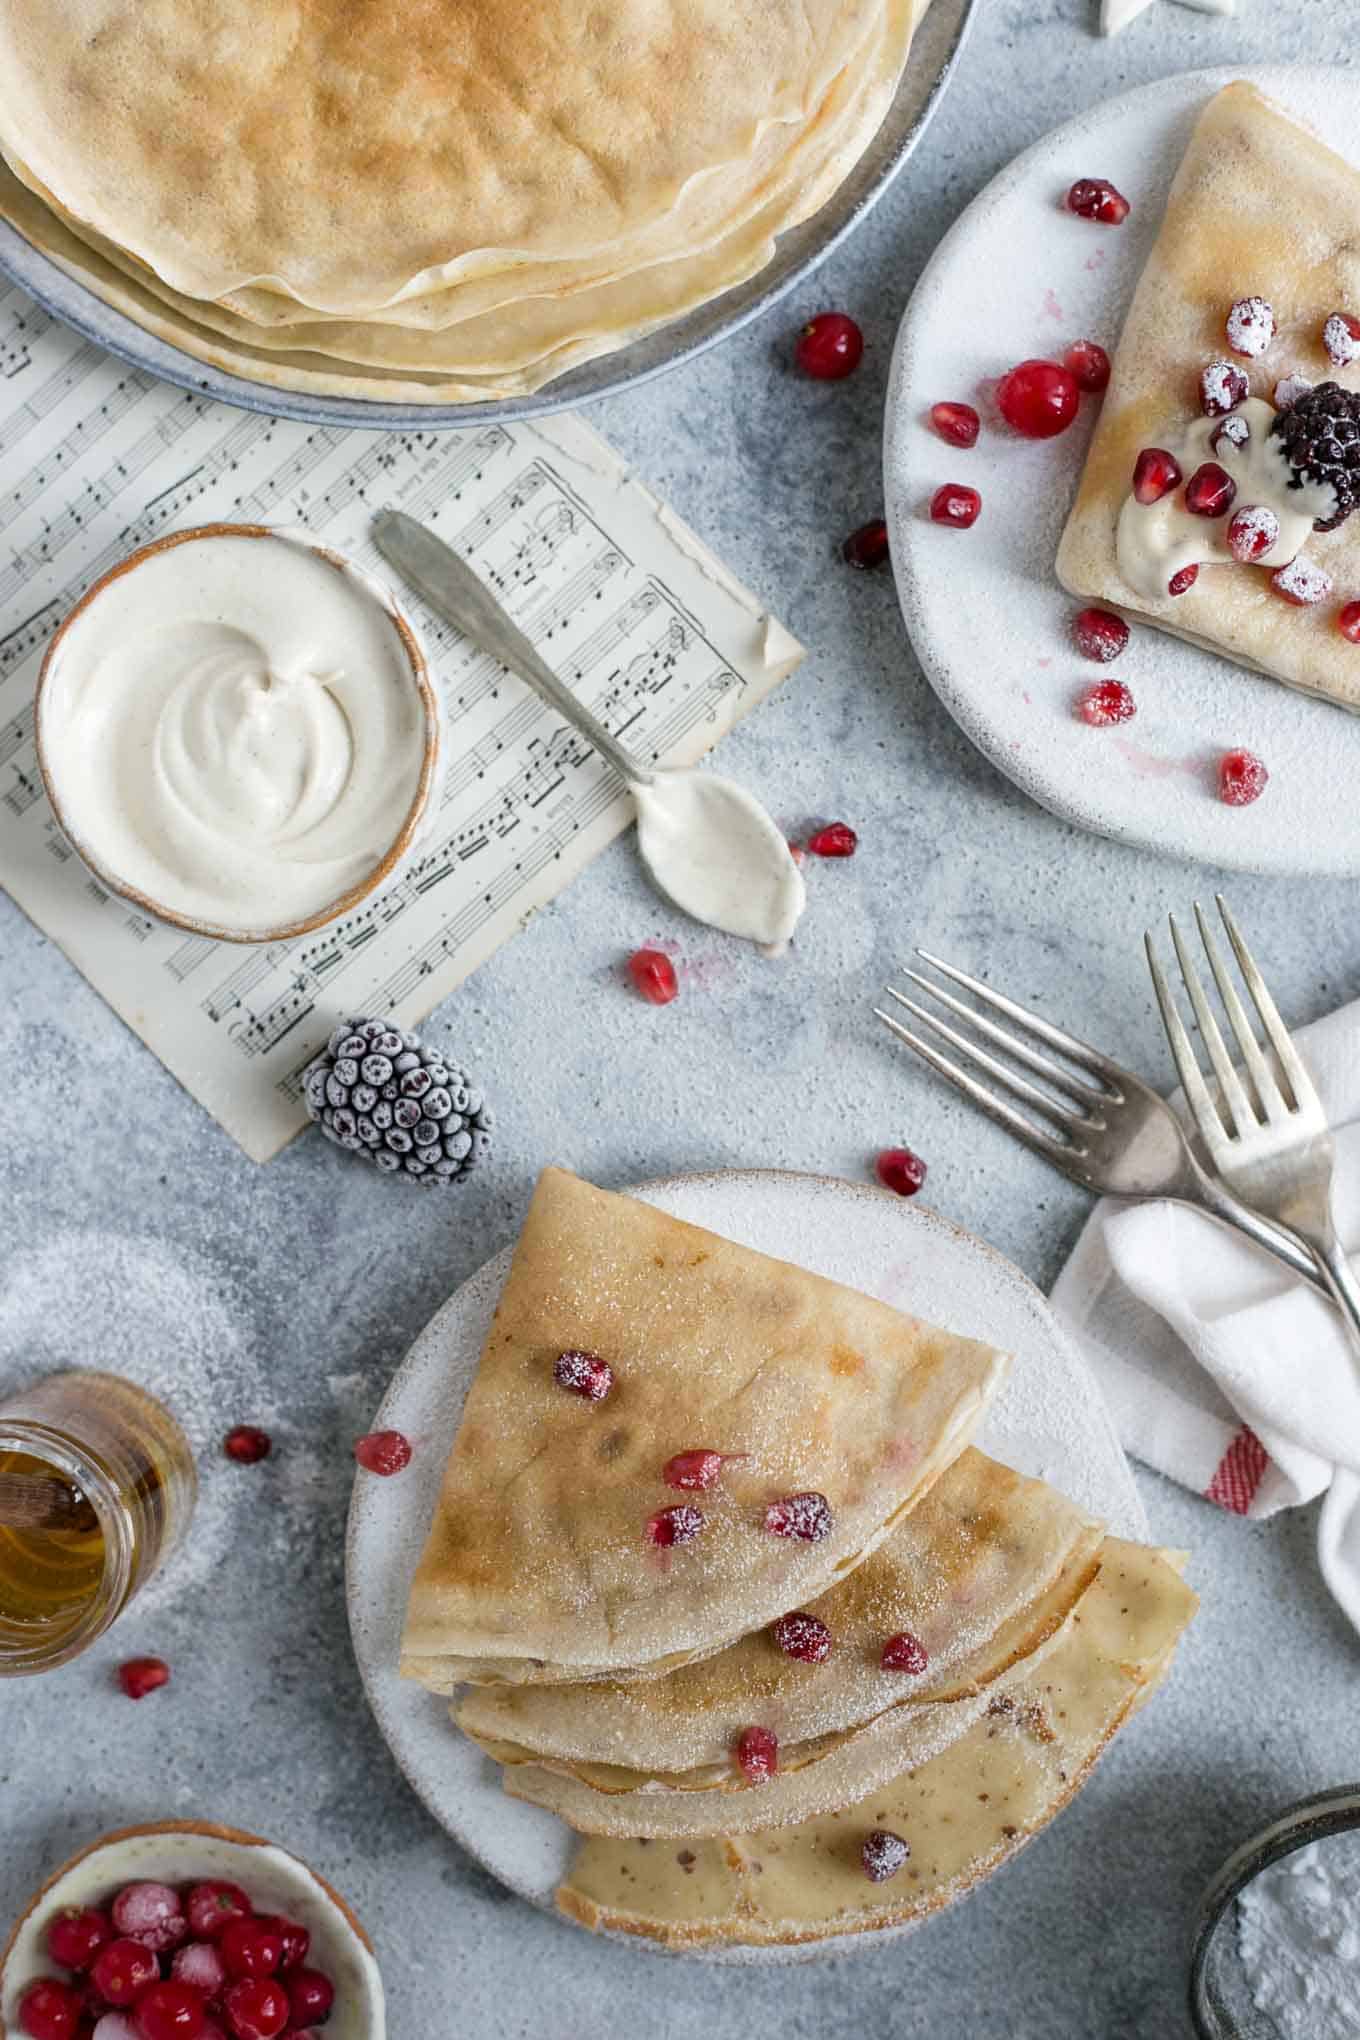 Delicate and delicious french crepes with creamy cashew filling #vegan #crepes #breakfast | via @annabanana.co